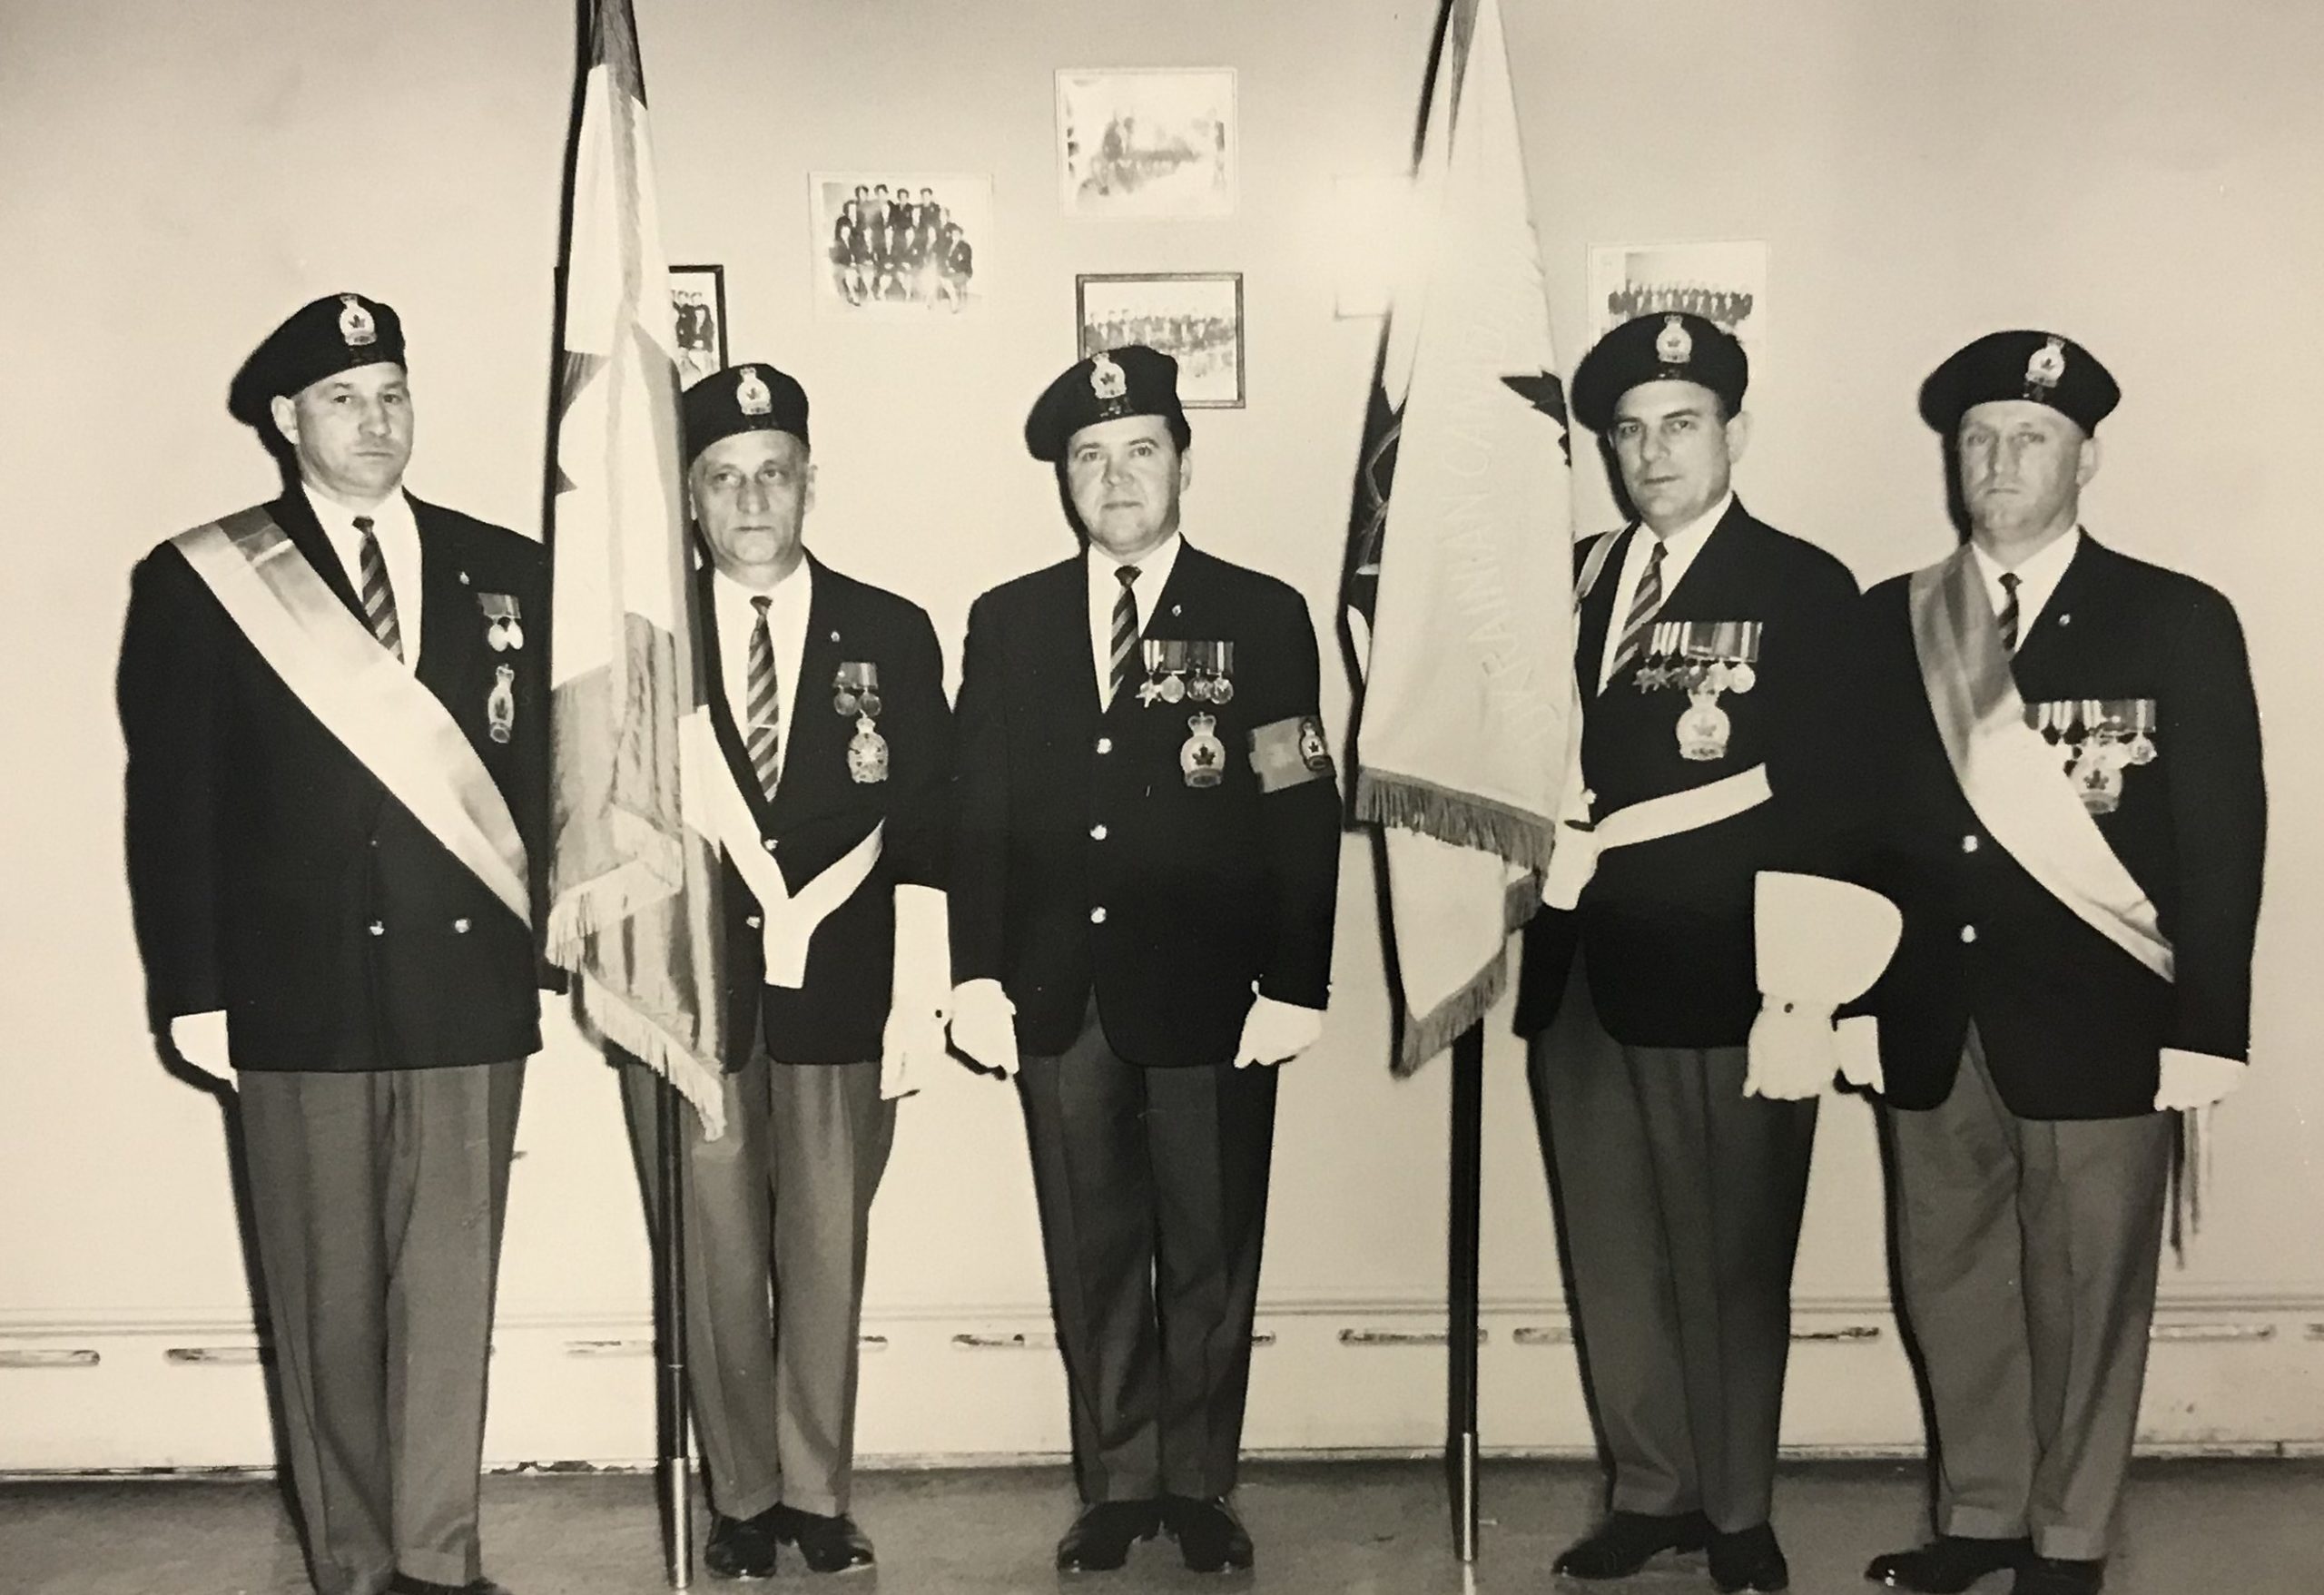 Black and white photograph of five men in uniform standing on a row with serious faces. Two of them are holding up flags draped around their poles.